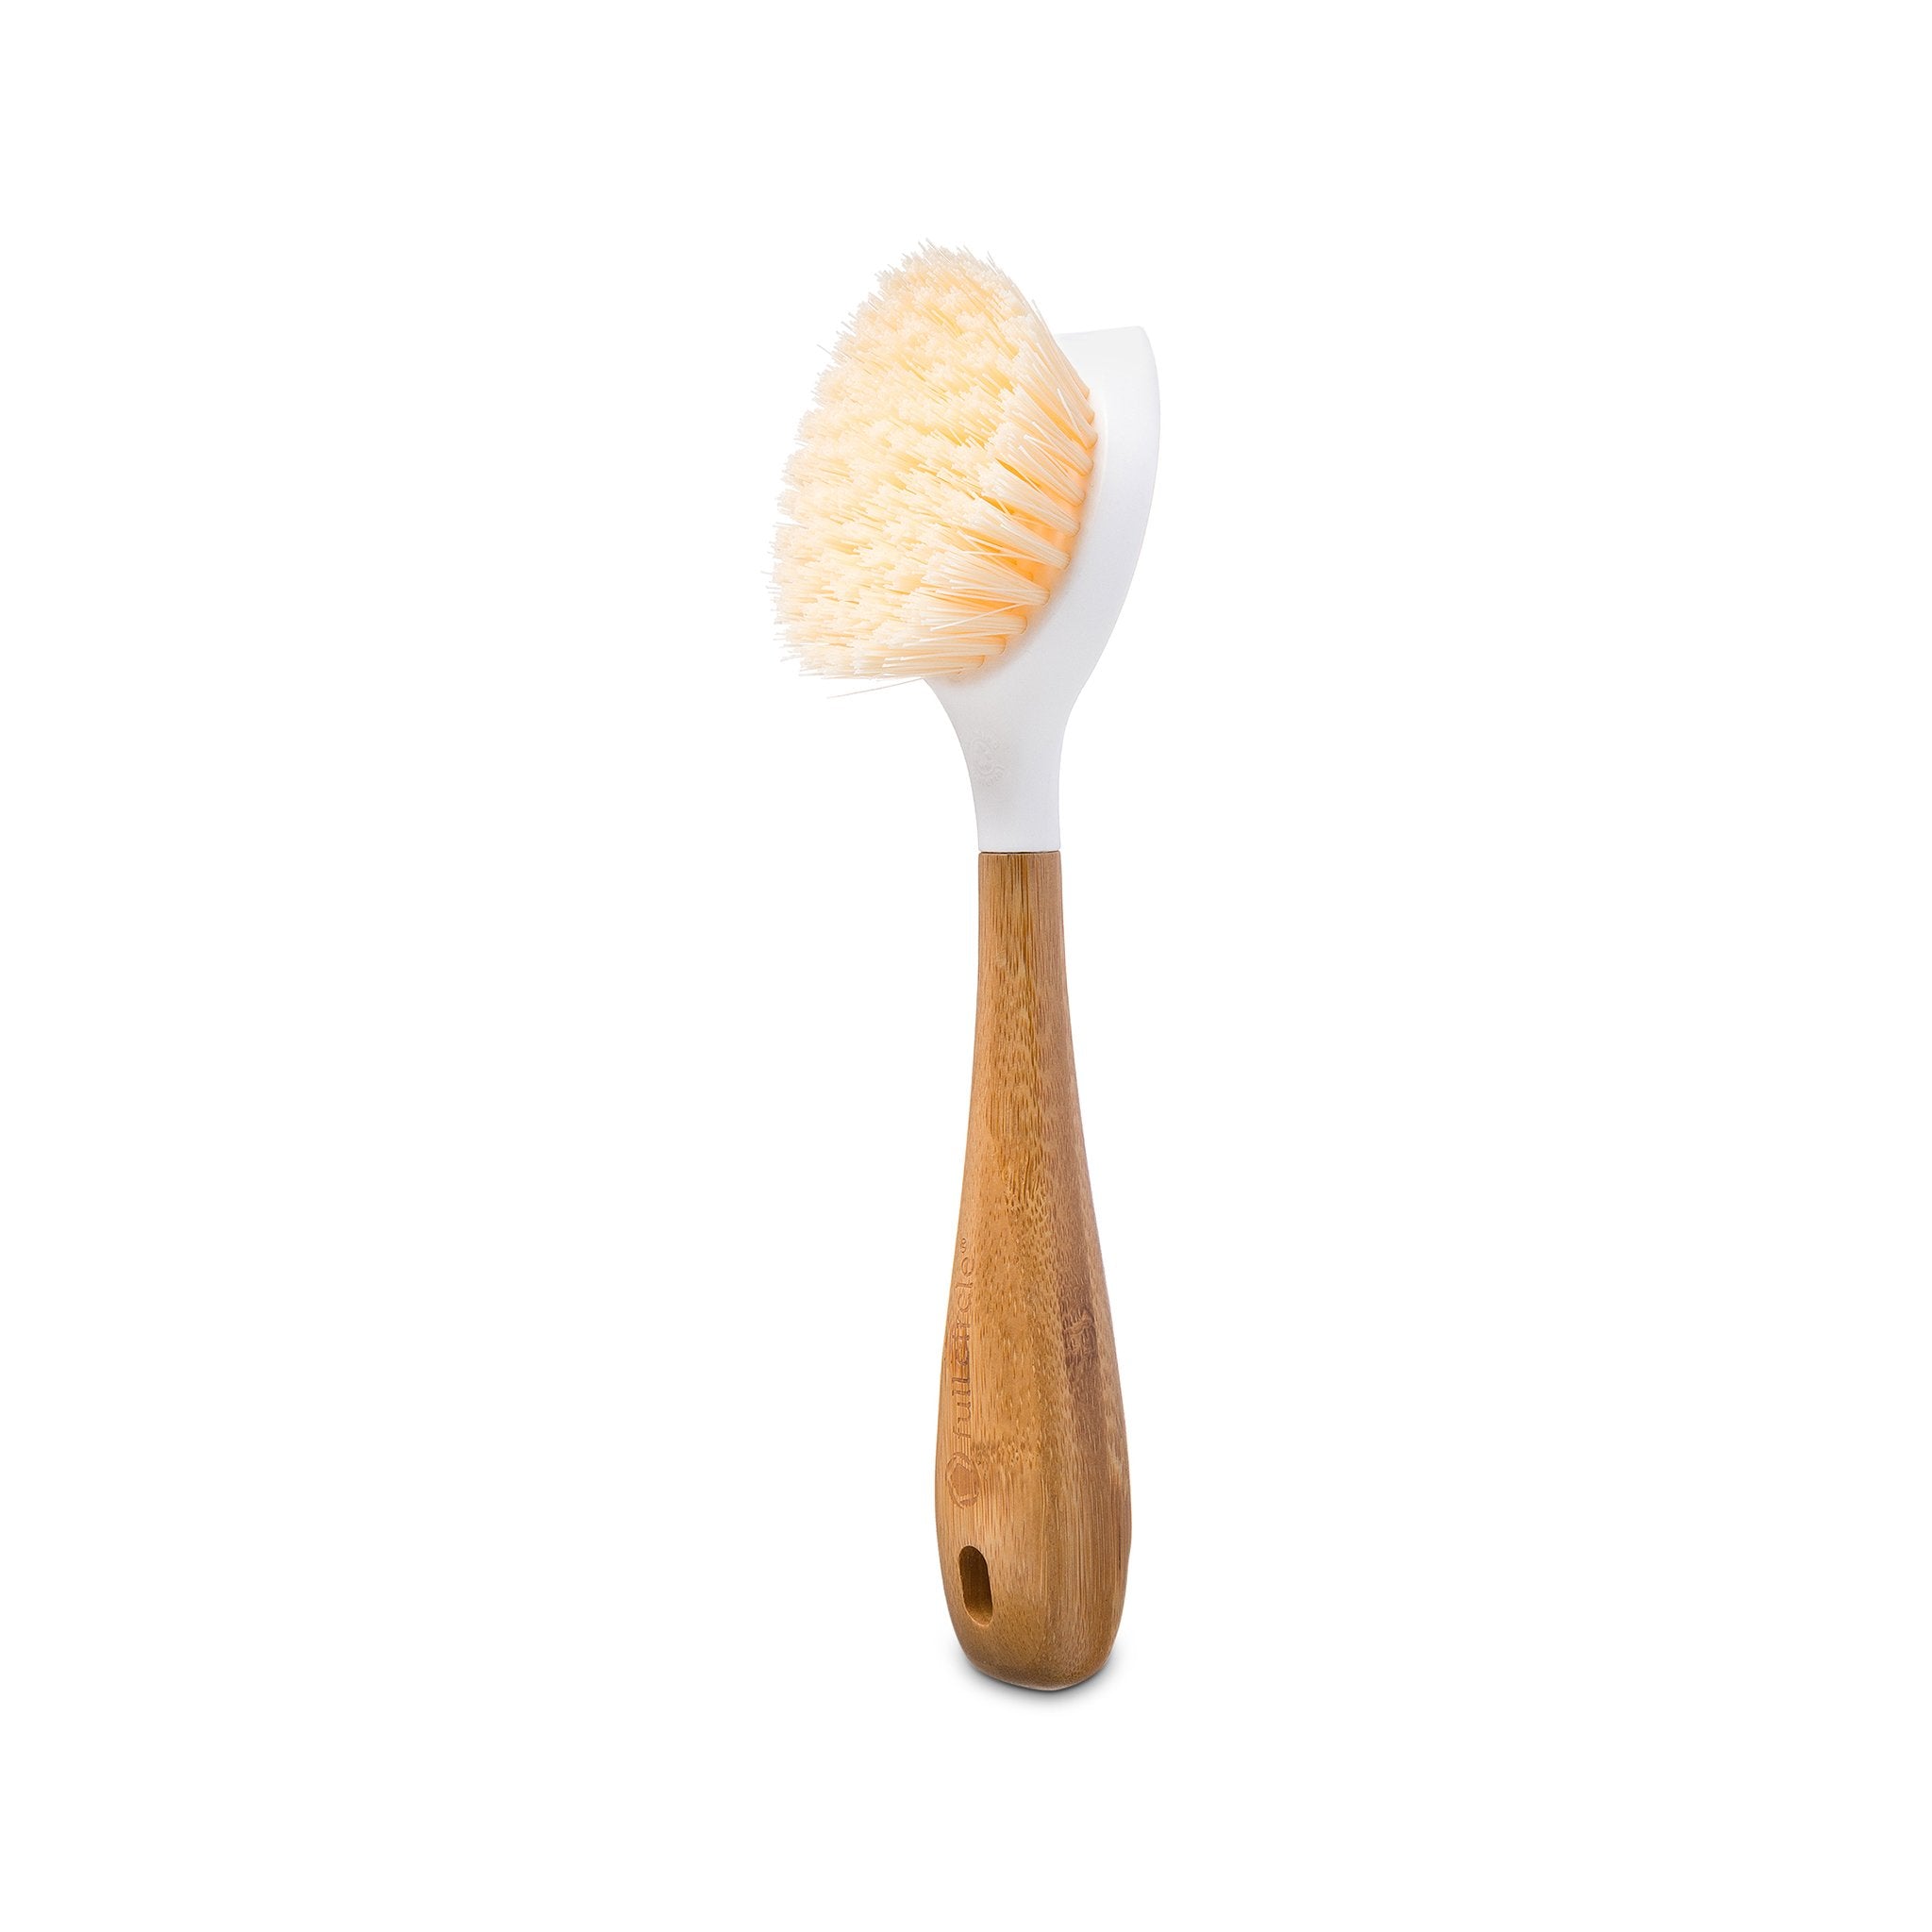 We tried Full Circle's Walnut Scrubber Sponge, and Here's What We